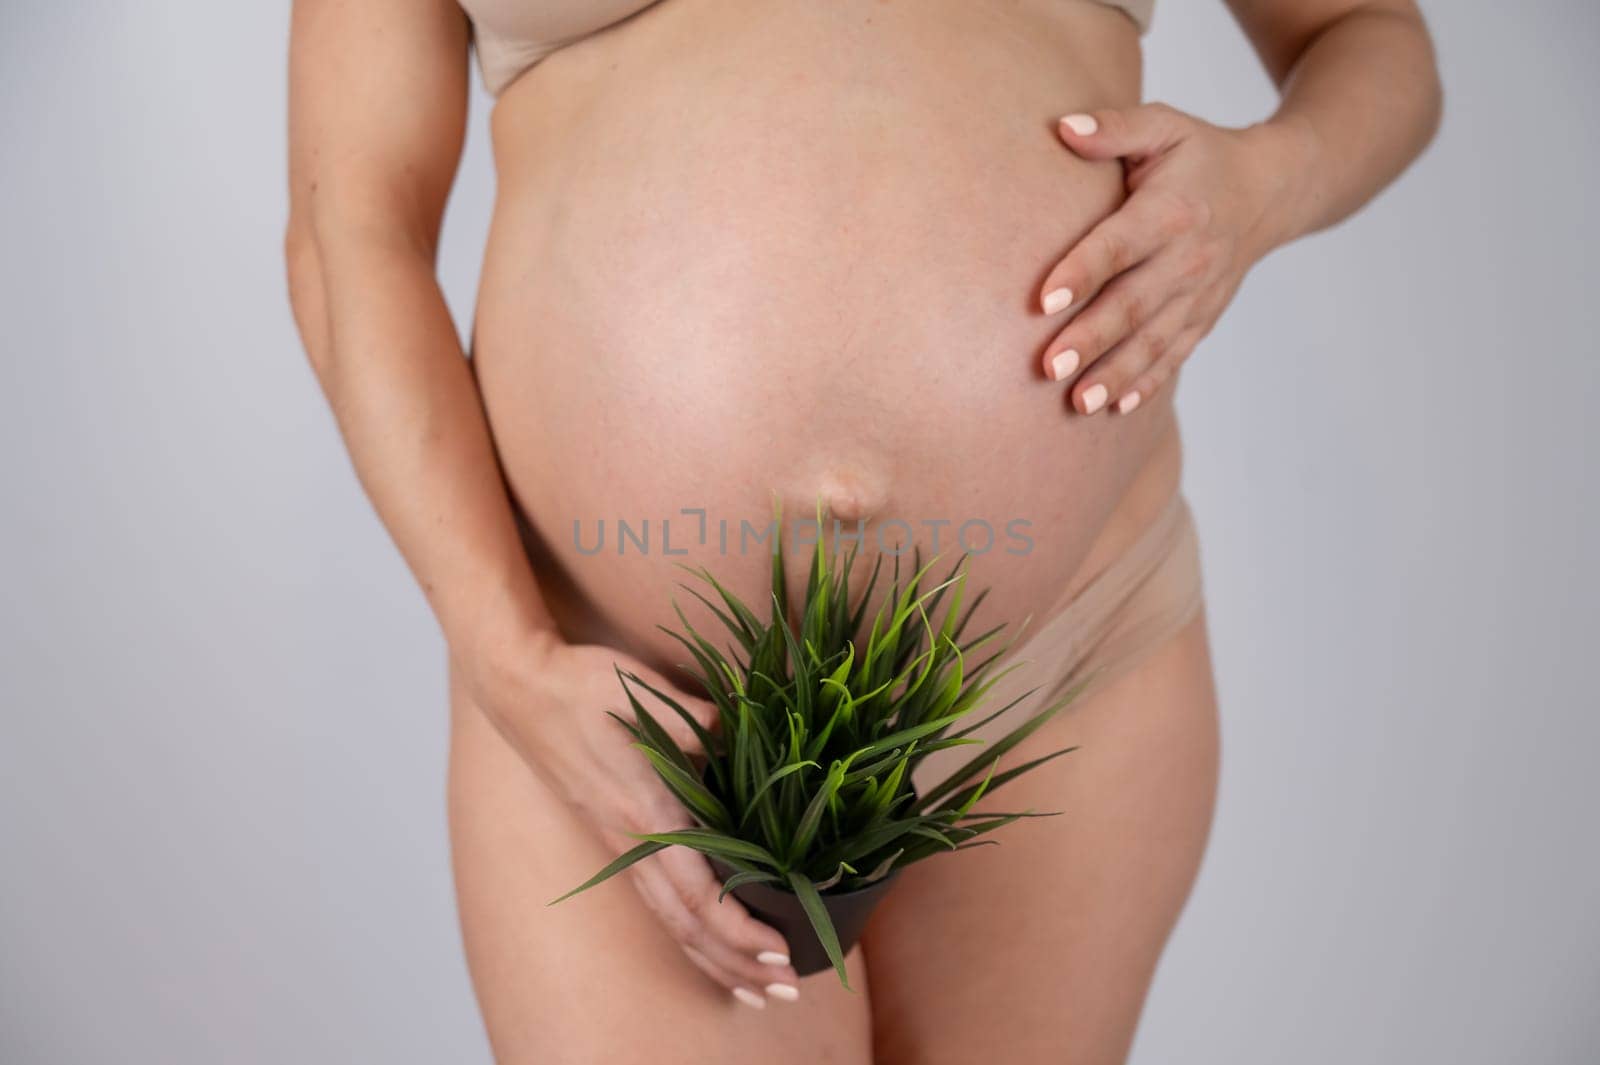 Faceless pregnant woman holding a plant. Metaphor for epilation of the bikini area. by mrwed54